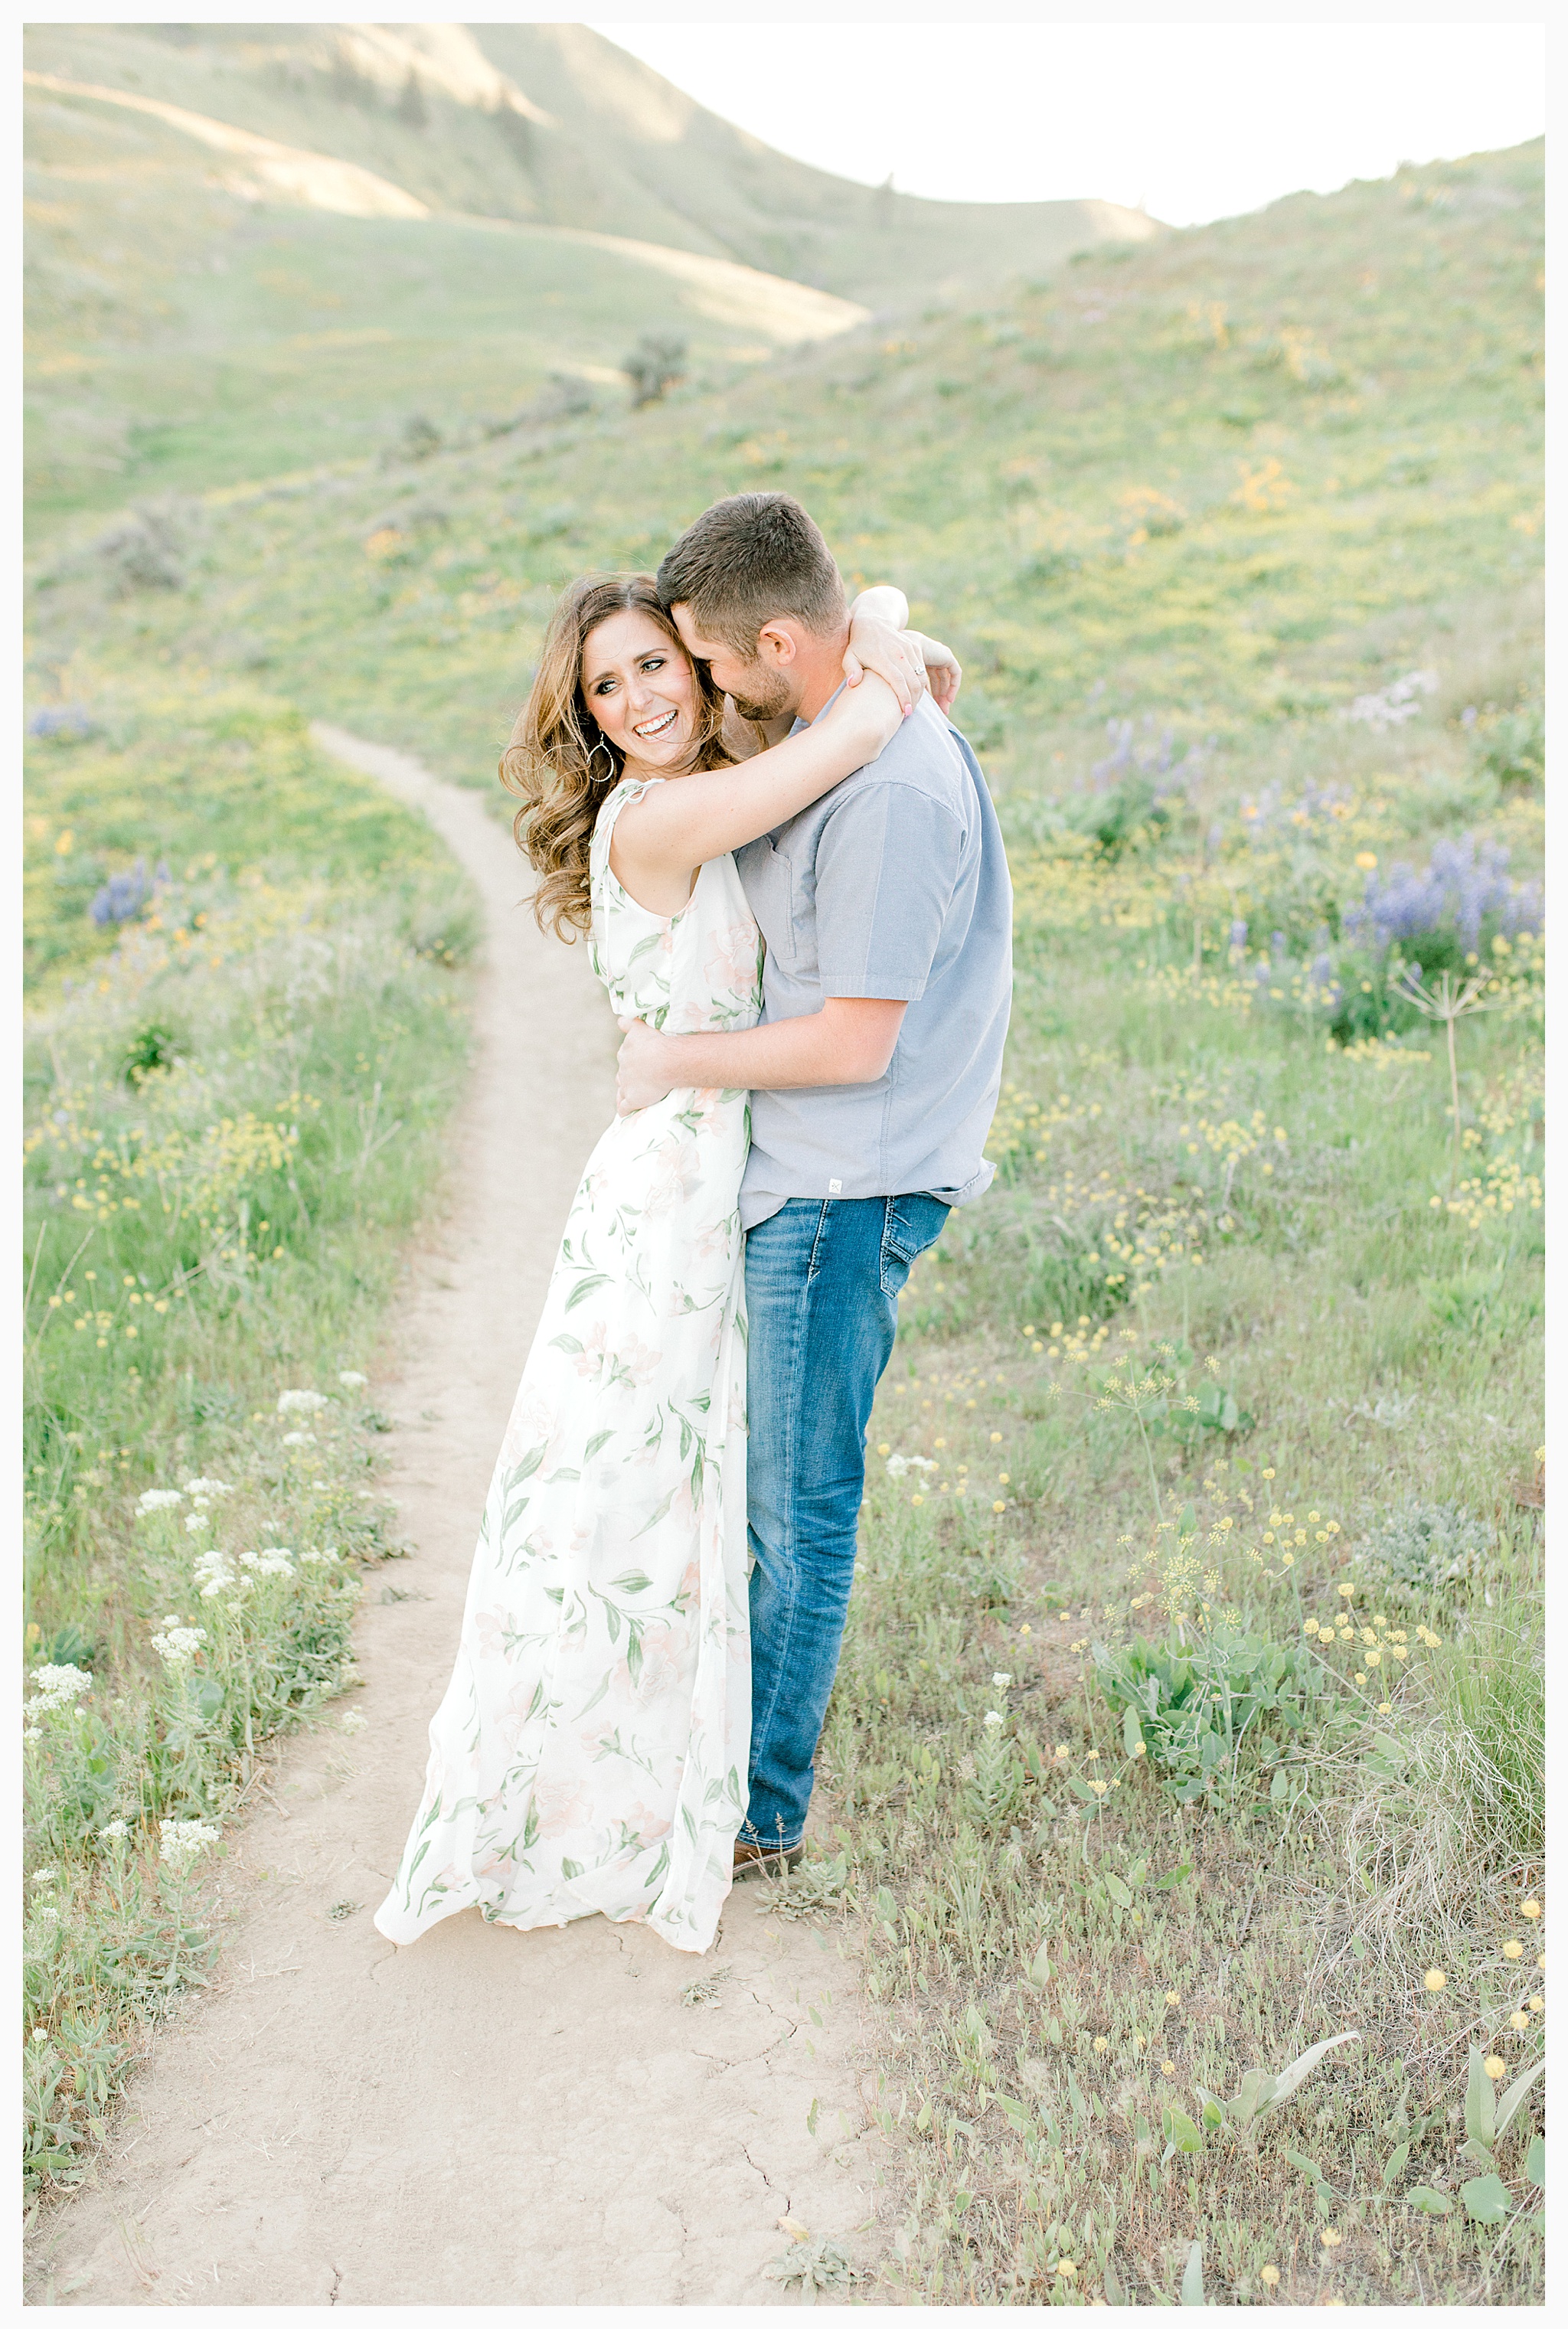 Engagement session amongst the wildflowers in Wenatchee, Washington | Engagement Session Outfit Inspiration for Wedding Photography with Emma Rose Company | Light and Airy PNW Photographer, Seattle Bride_0010.jpg